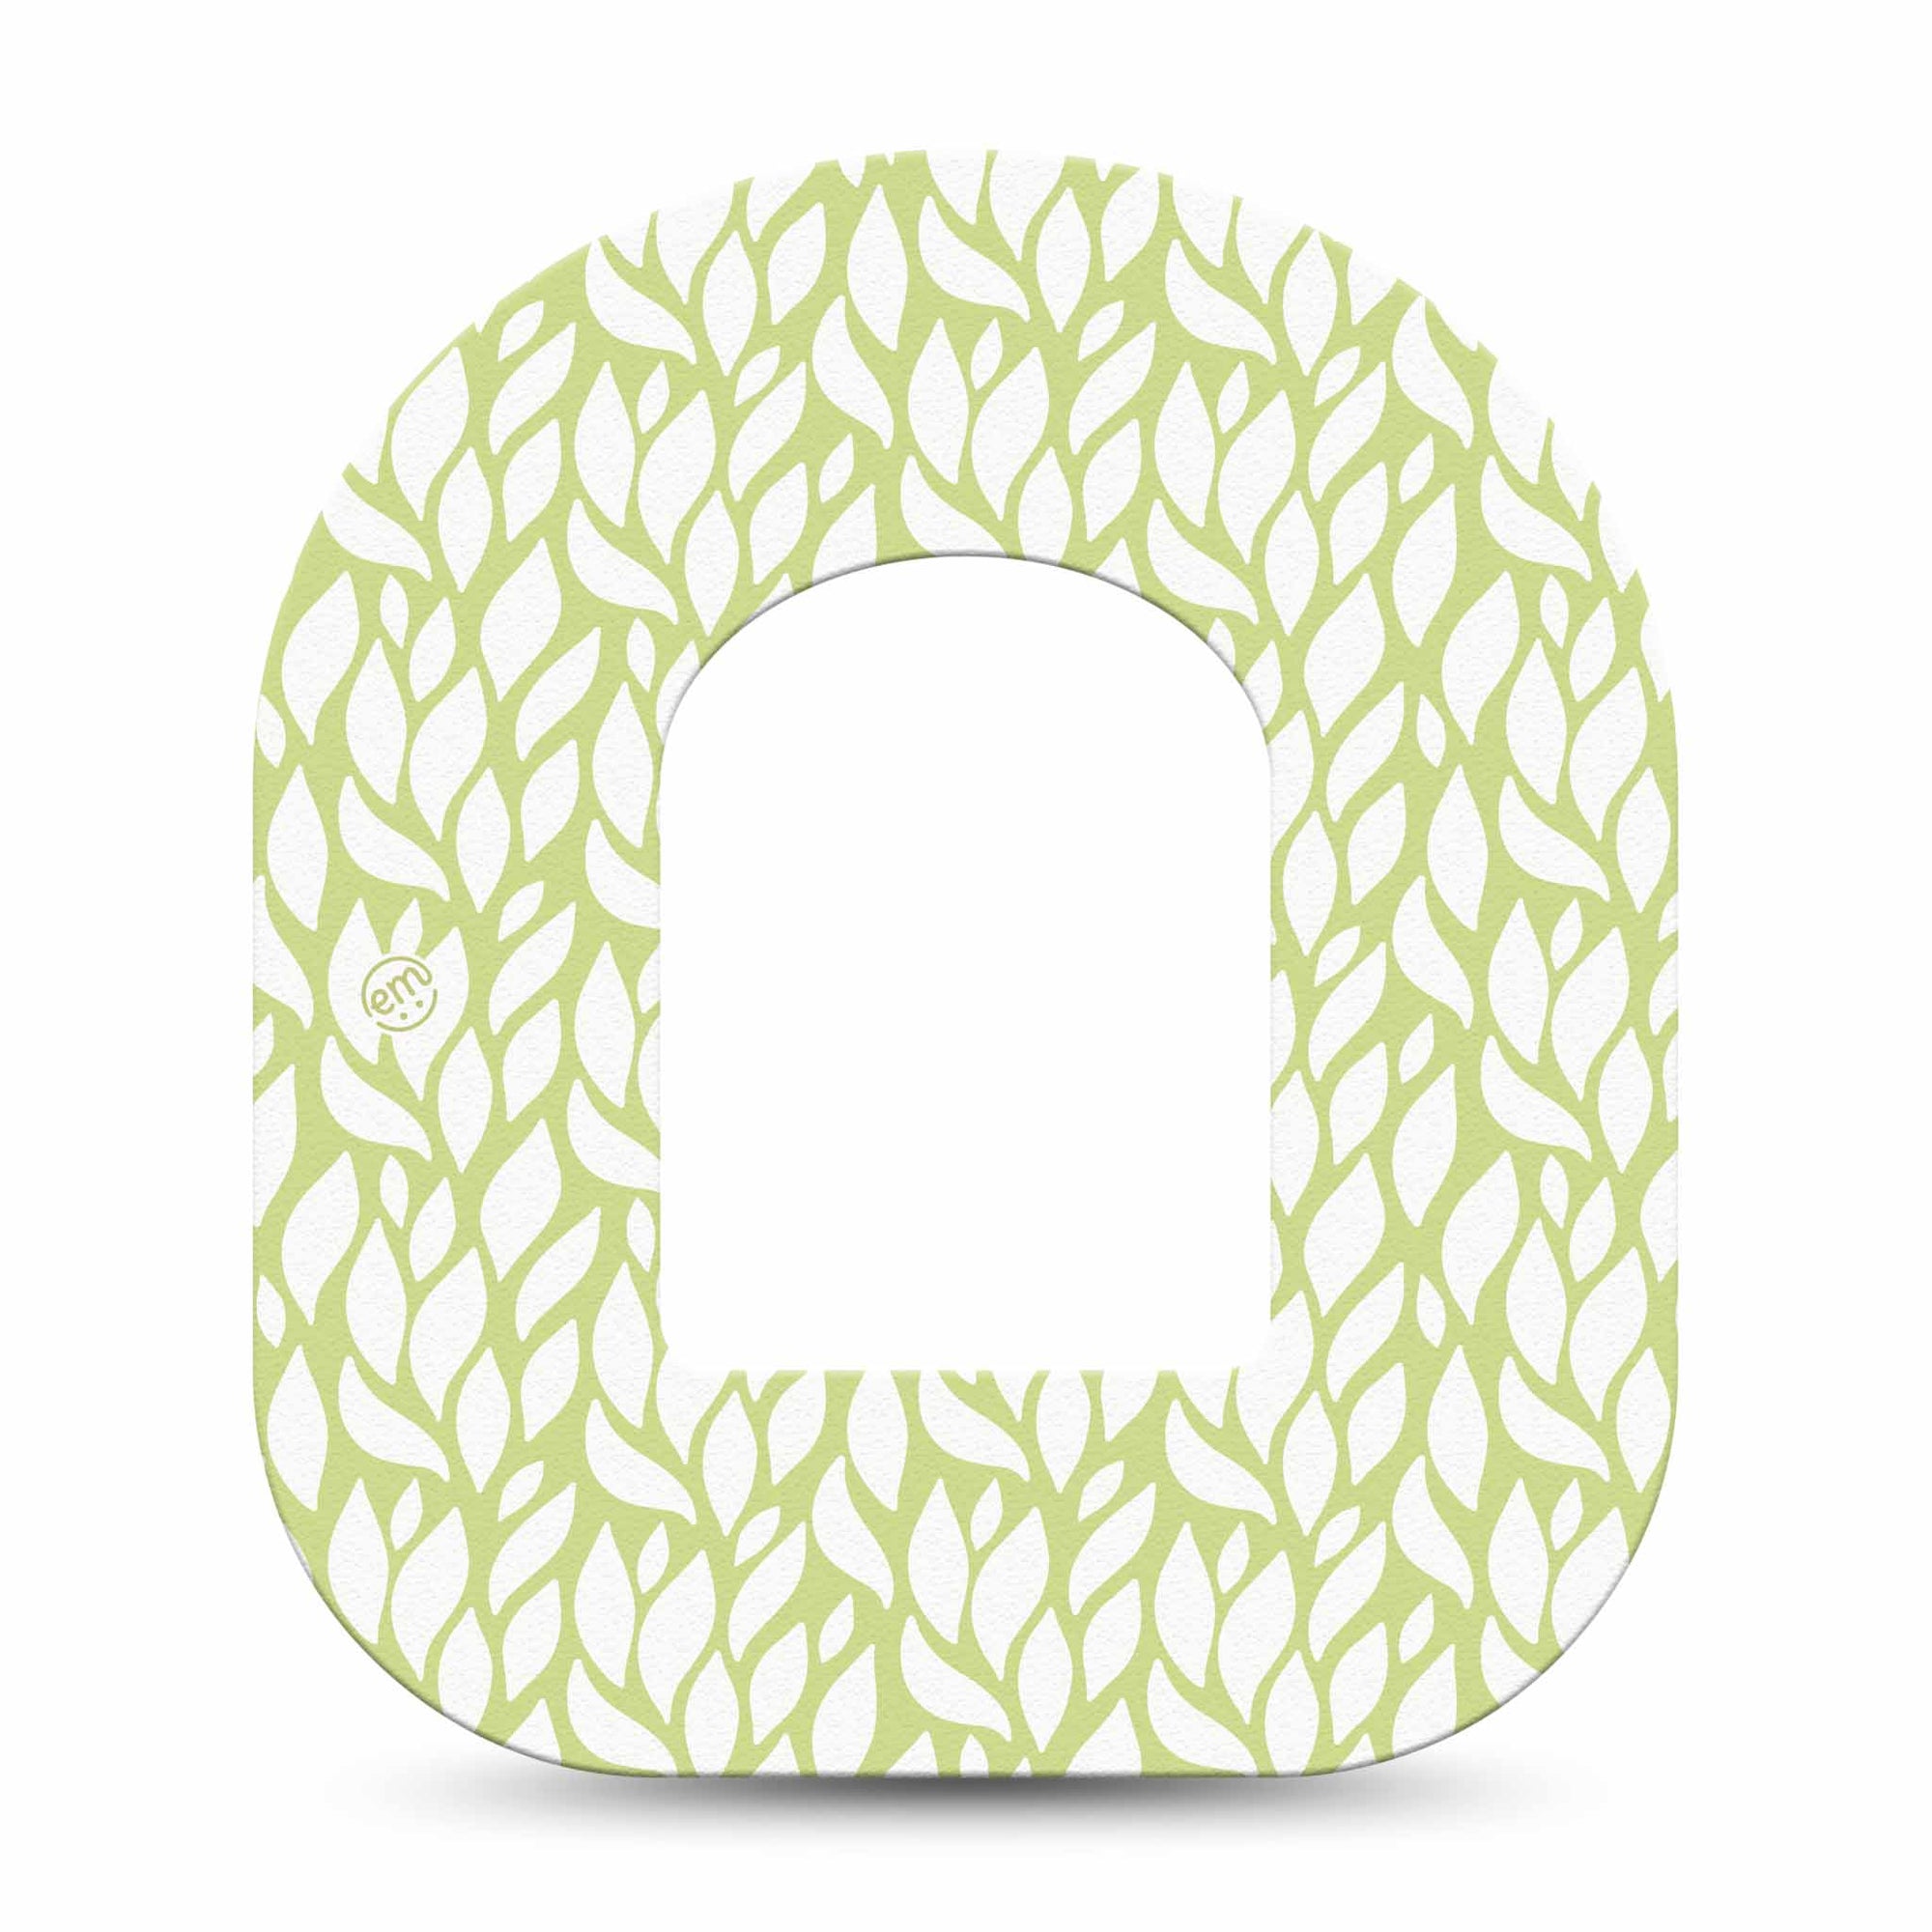 ExpressionMed Sage Greens Pod Tape, Single, Green Plant Pattern Design Adhesive Overlay Omnipod Patch